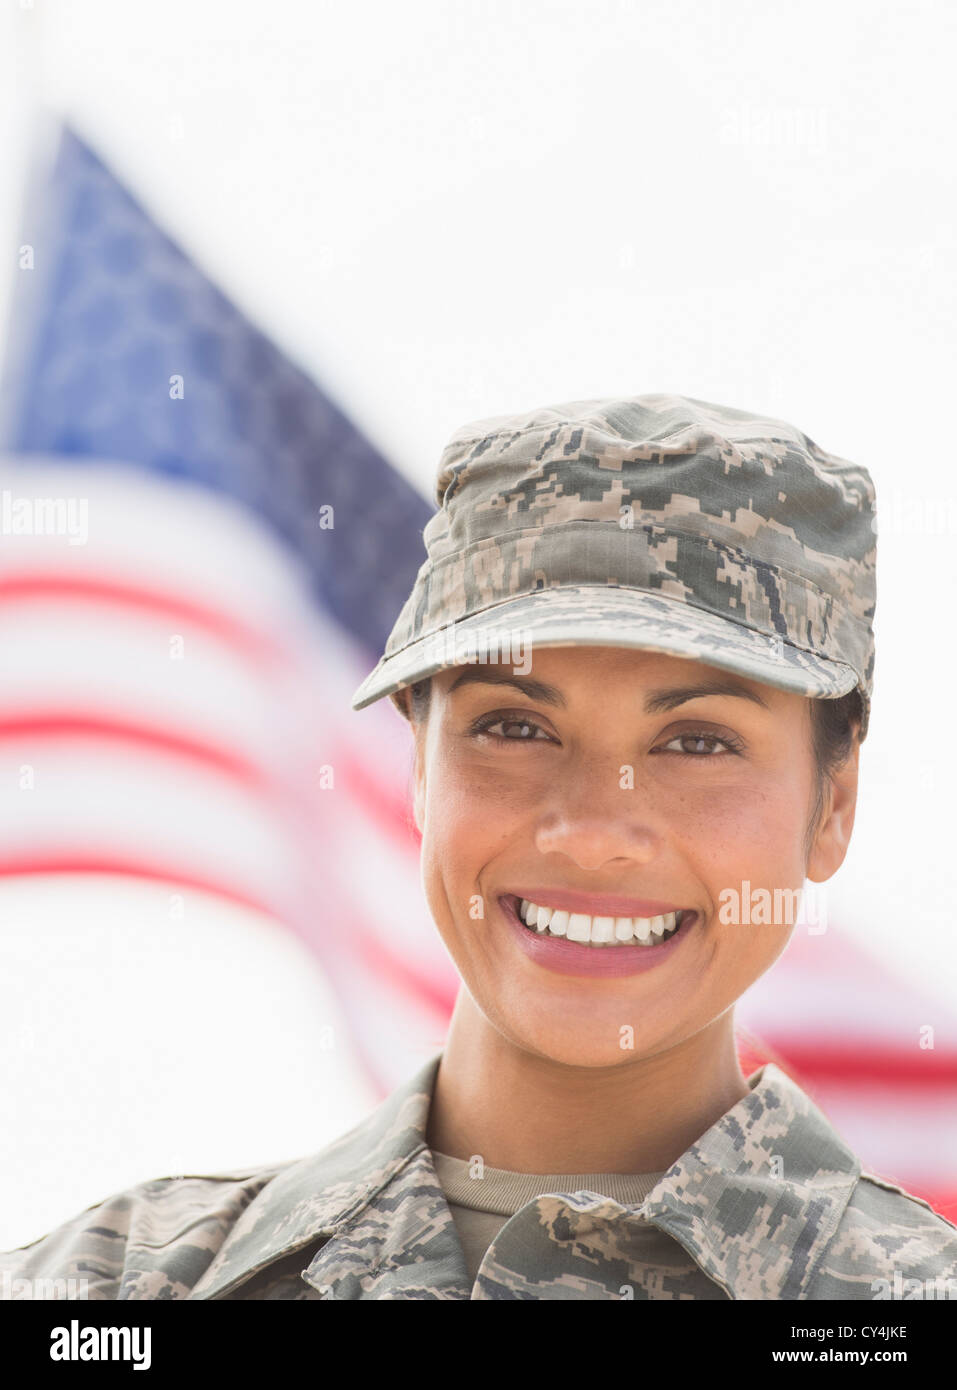 USA, New Jersey, Jersey City, Portrait of female army soldier, American flag in background Stock Photo